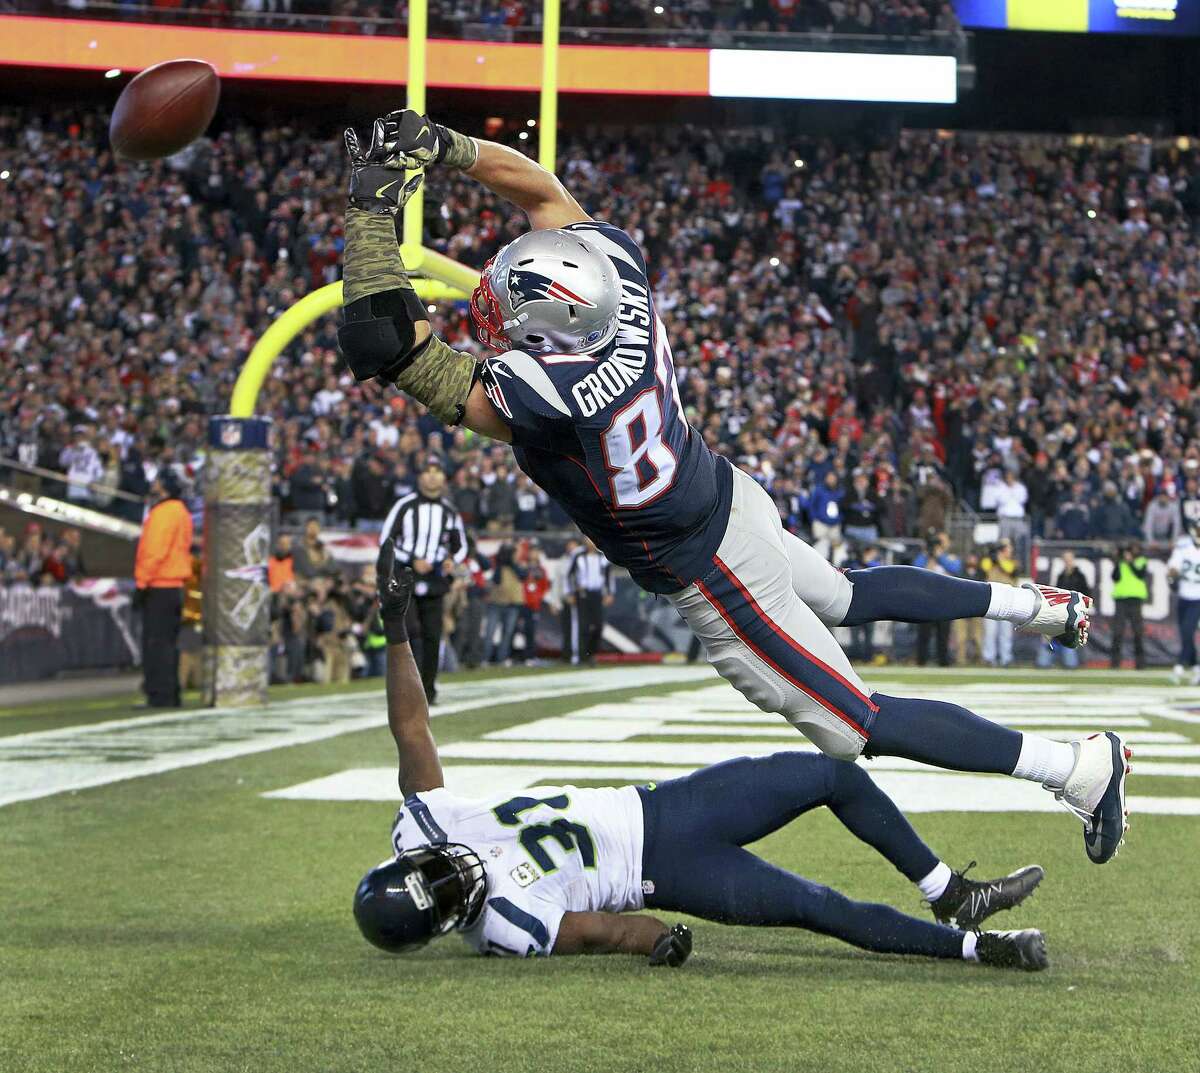 New England Patriots tight end Rob Gronkowski (87) can’t catch a pass in the end zone over Seattle Seahawks safety Kam Chancellor (31) at the end of an NFL football game on Sunday, Nov. 13, 2016 in Foxborough, Mass.